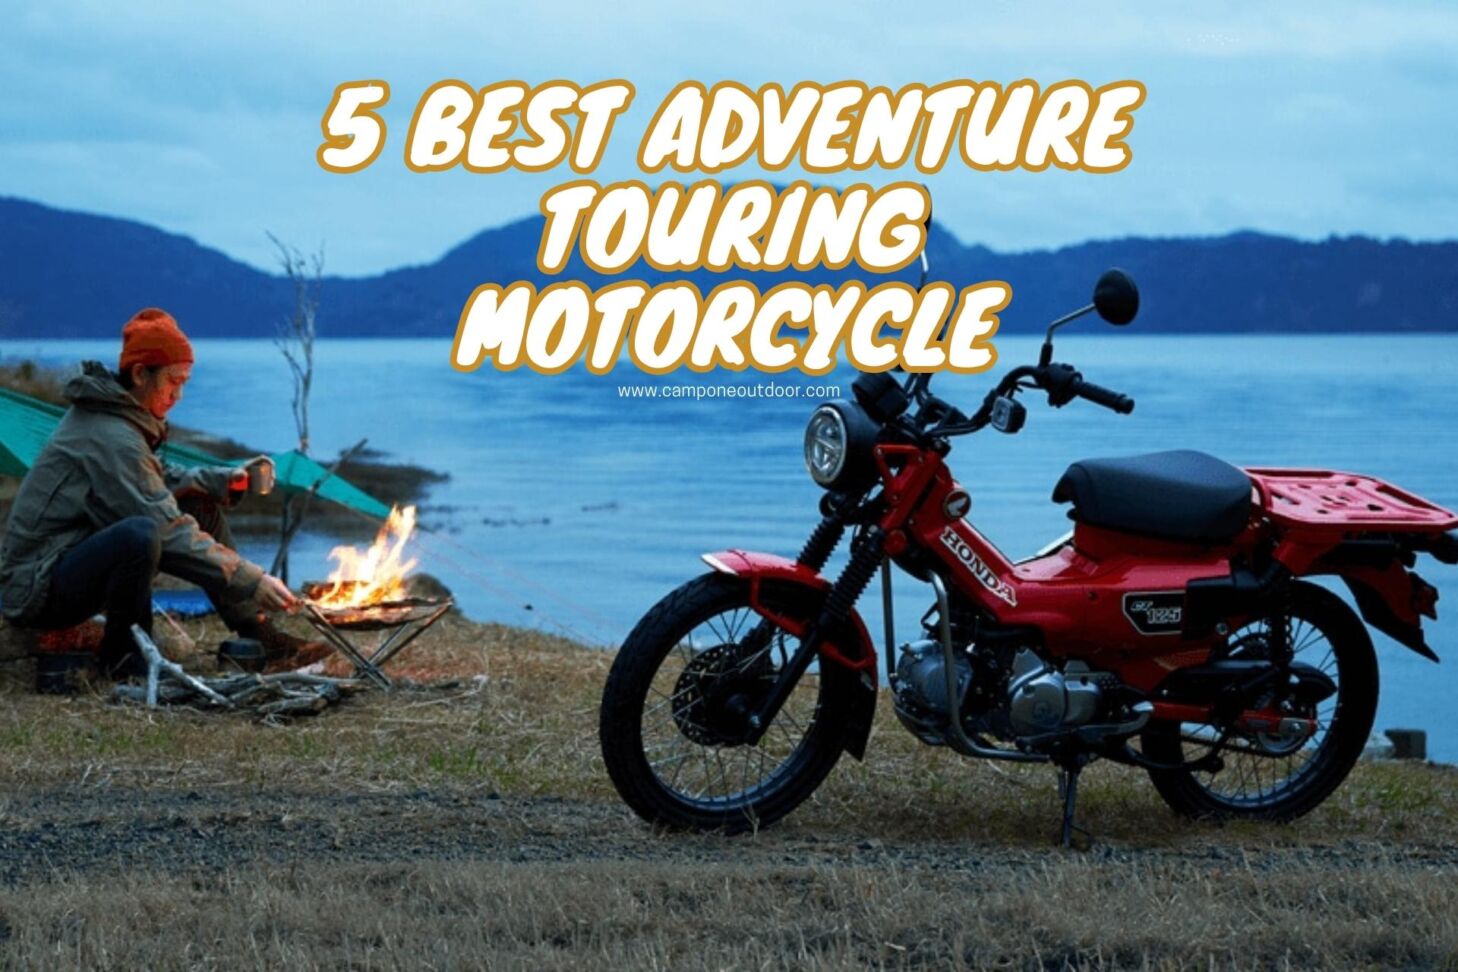 5 Best adventure touring motorcycle